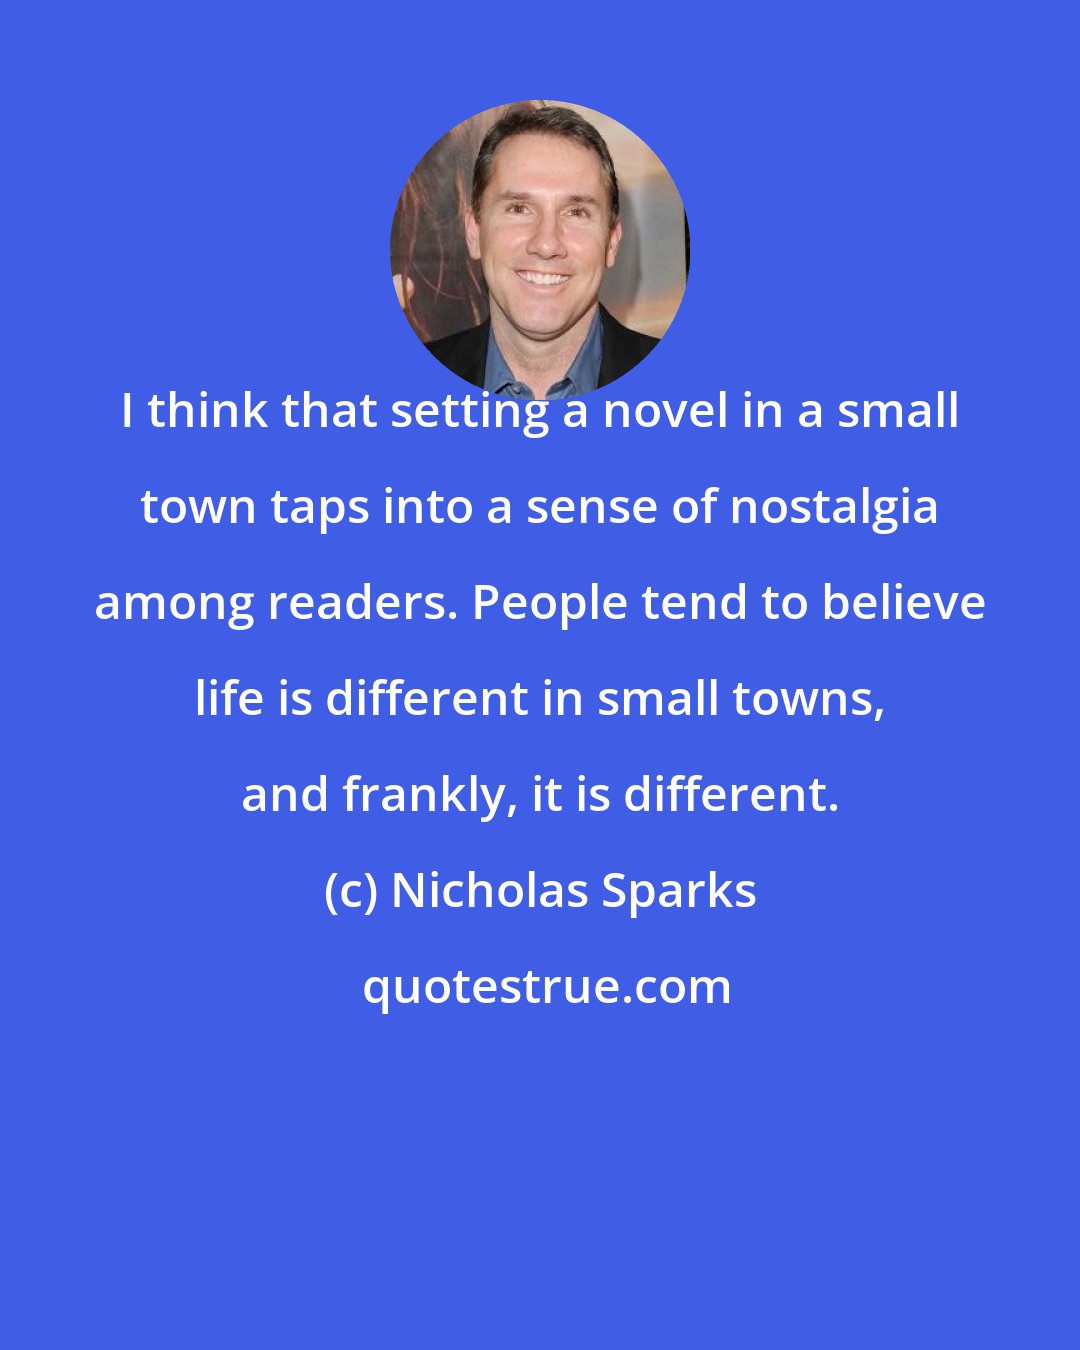 Nicholas Sparks: I think that setting a novel in a small town taps into a sense of nostalgia among readers. People tend to believe life is different in small towns, and frankly, it is different.